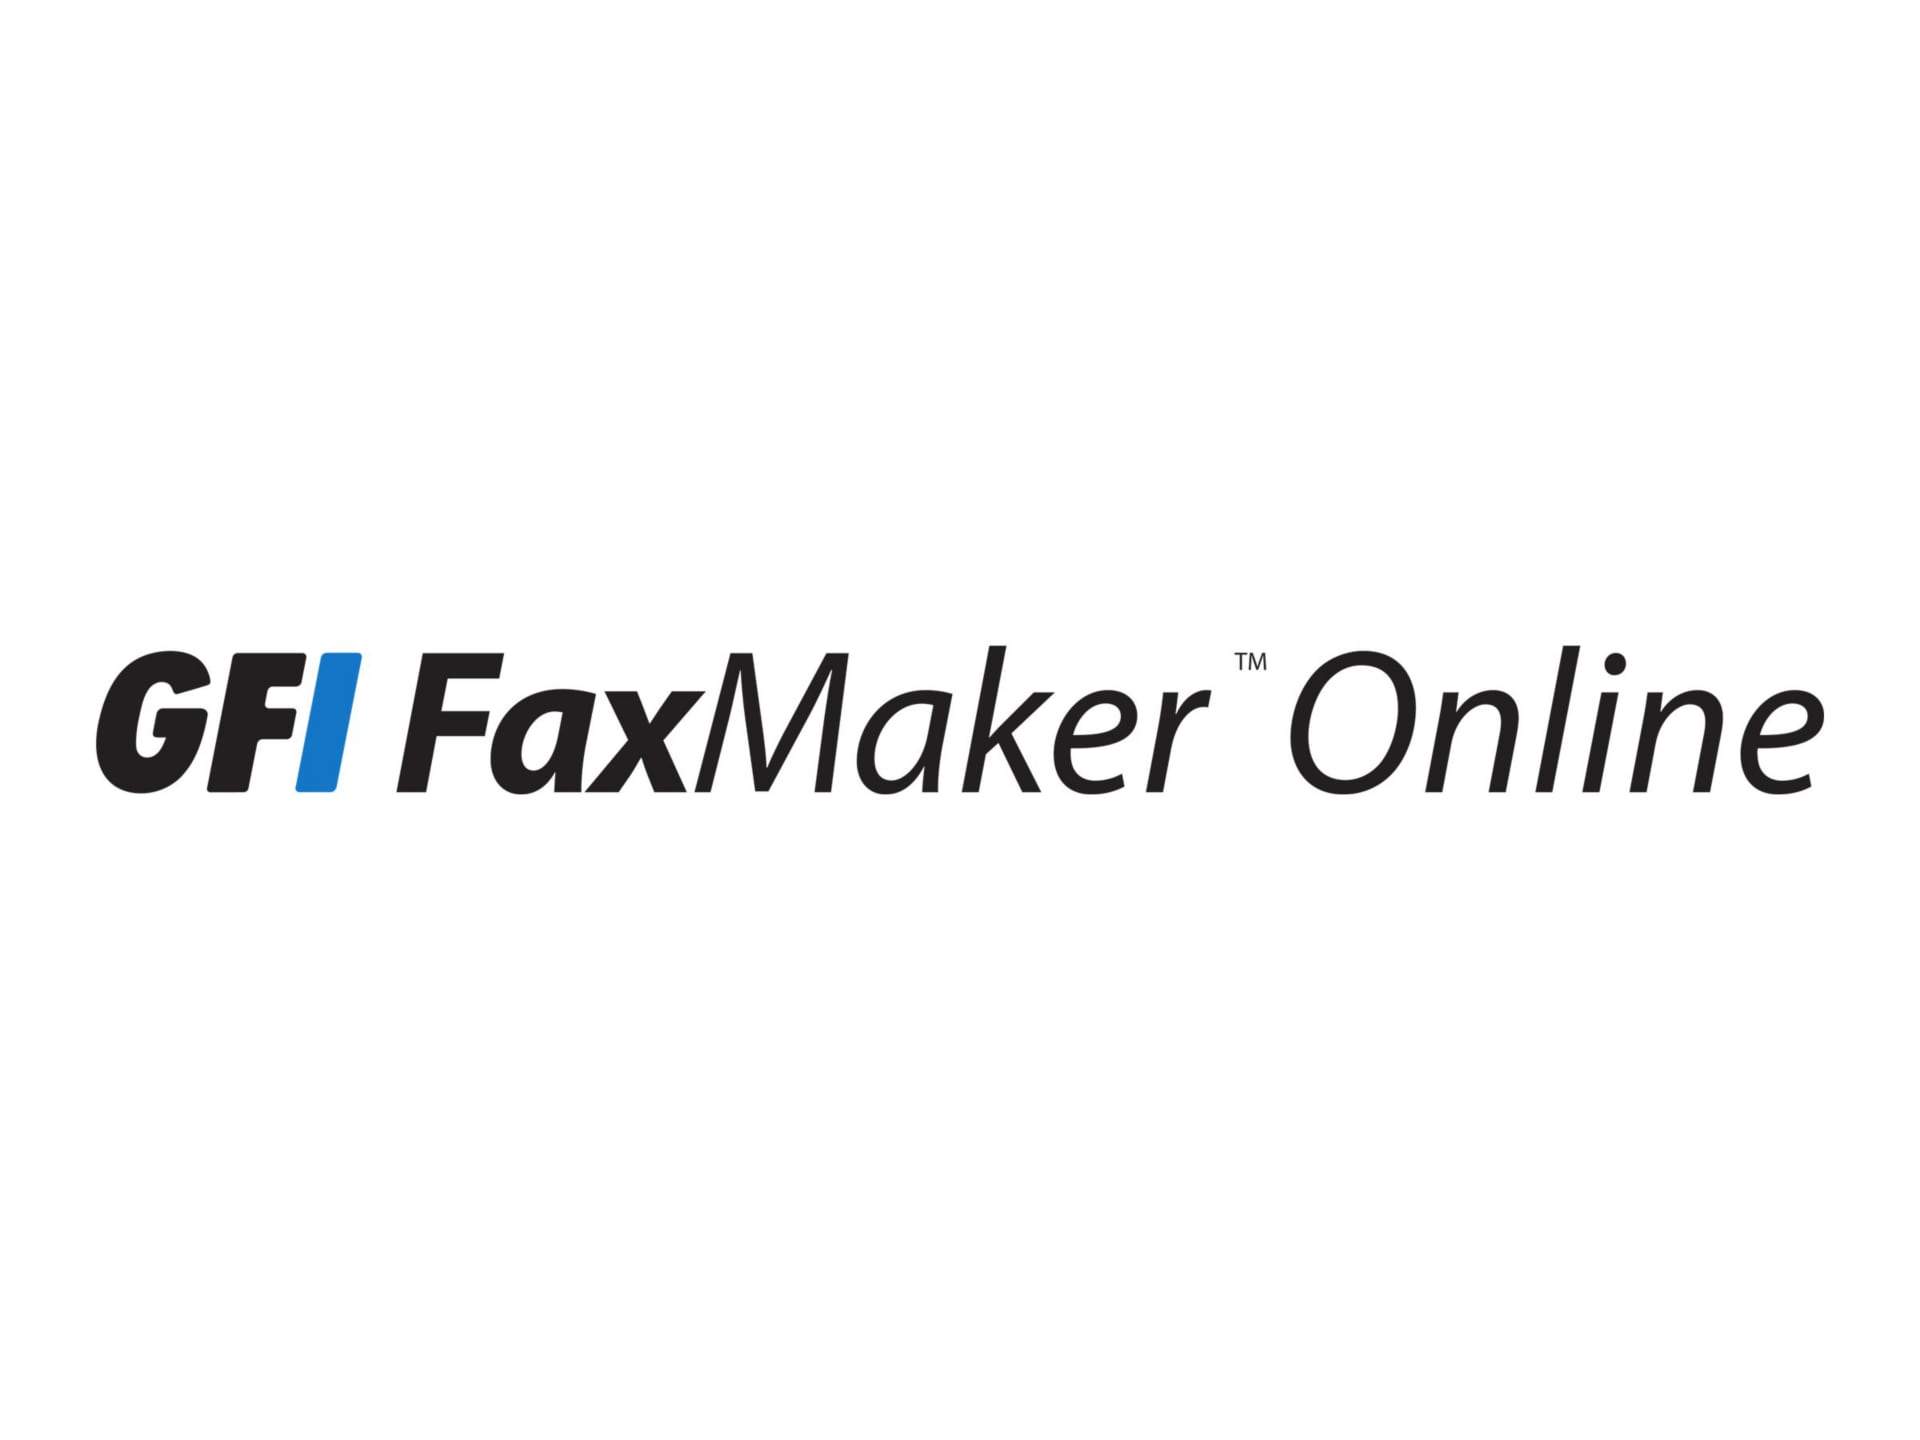 GFI FAXmaker Online fax services - subscription license (1 year) - 6000 fax pages inbound/outbound LOCAL